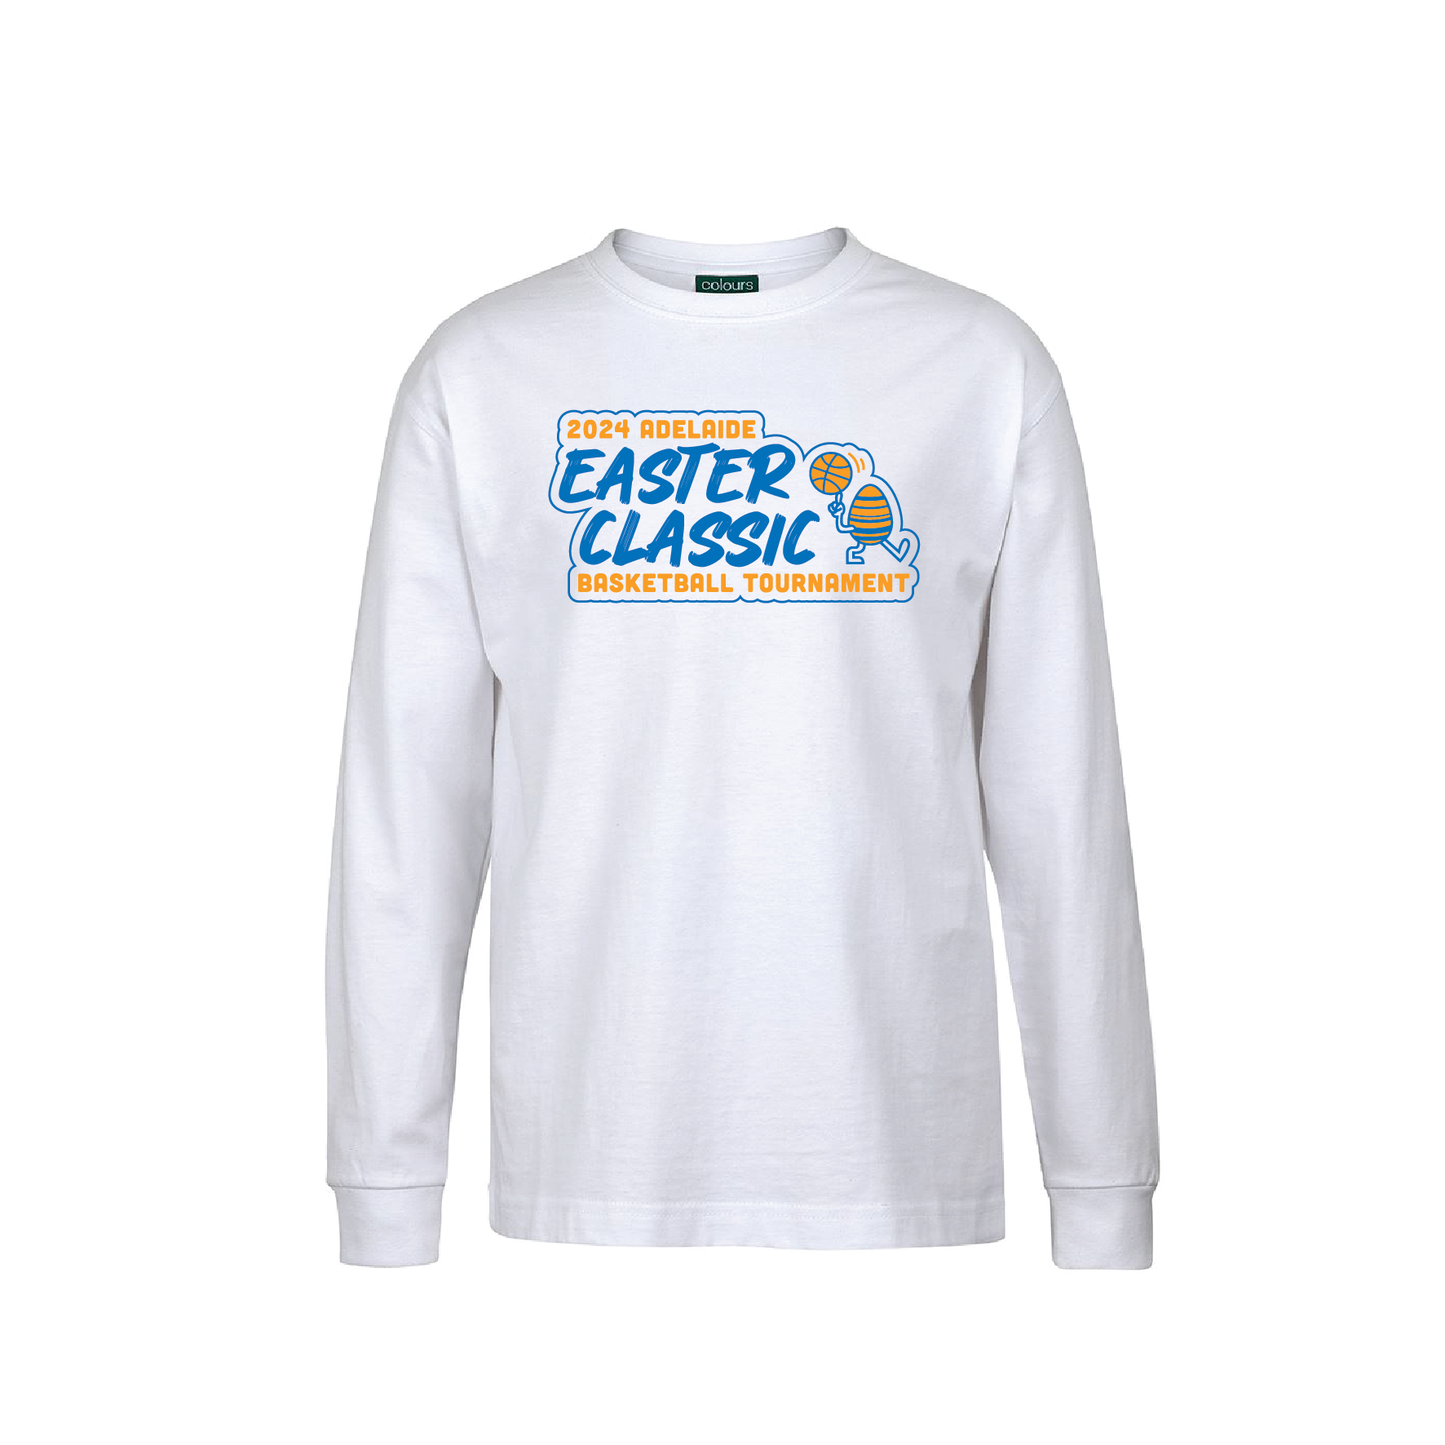 EASTER CLASSIC T-SHIRT WHITE LONG SLEEVE TEAM AND INDIVIDUAL PLAYER NAMES ON BACK (MIN QTY 8+)